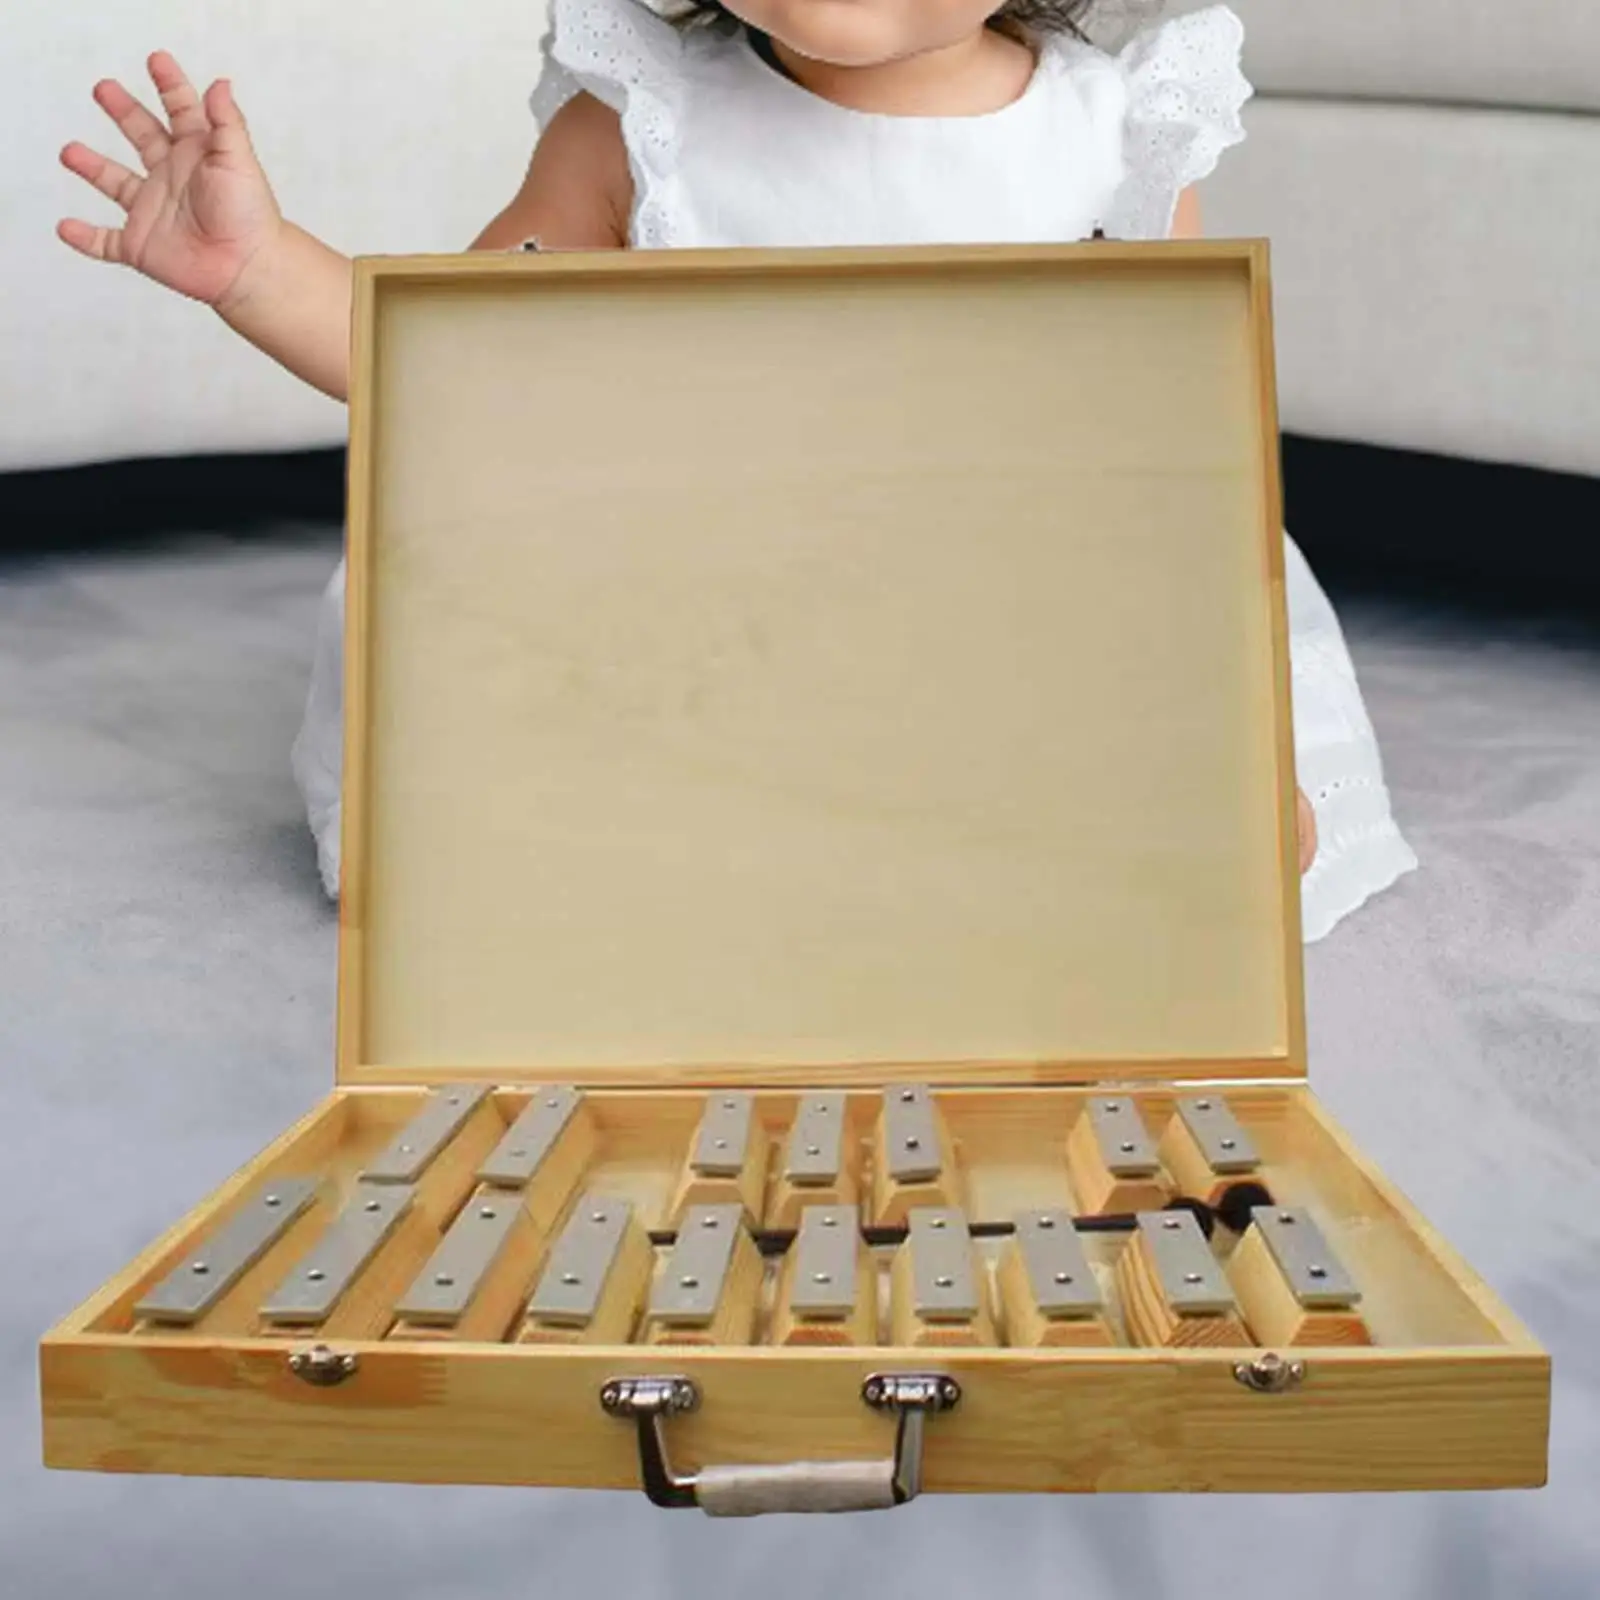 Xylophone Preschool Learning Musical Toy 17 Notes Glockenspiel Xylophone